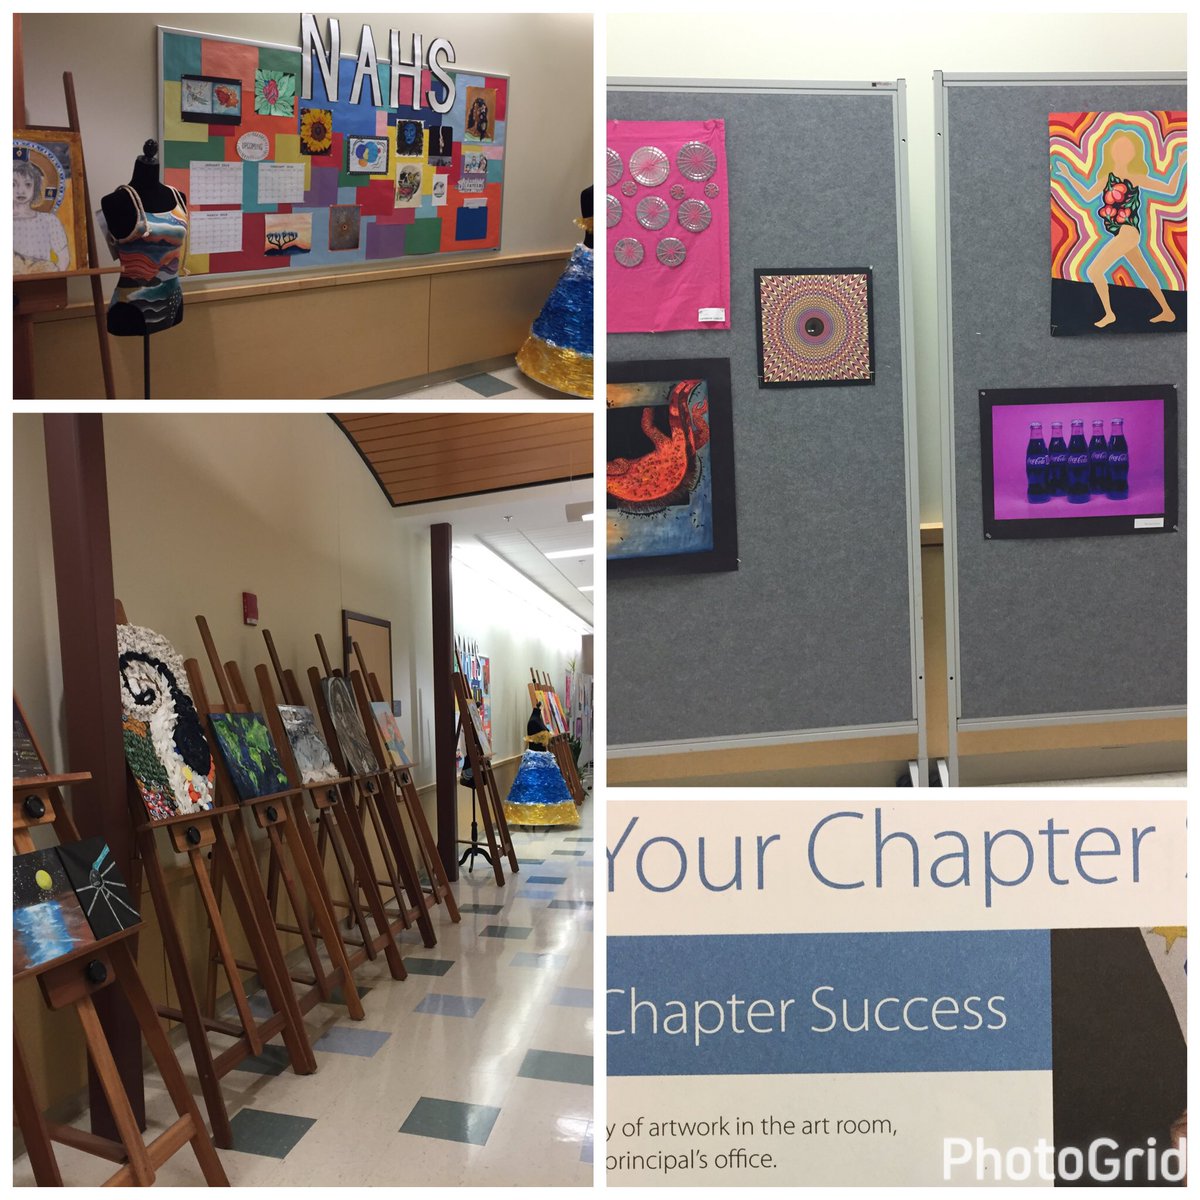 A huge thank you to the MERHS leadership committee of NAHS for organizing a fantastic display of artwork in the second floor “artwing”! #artthriveshere #strongartsstrongschools